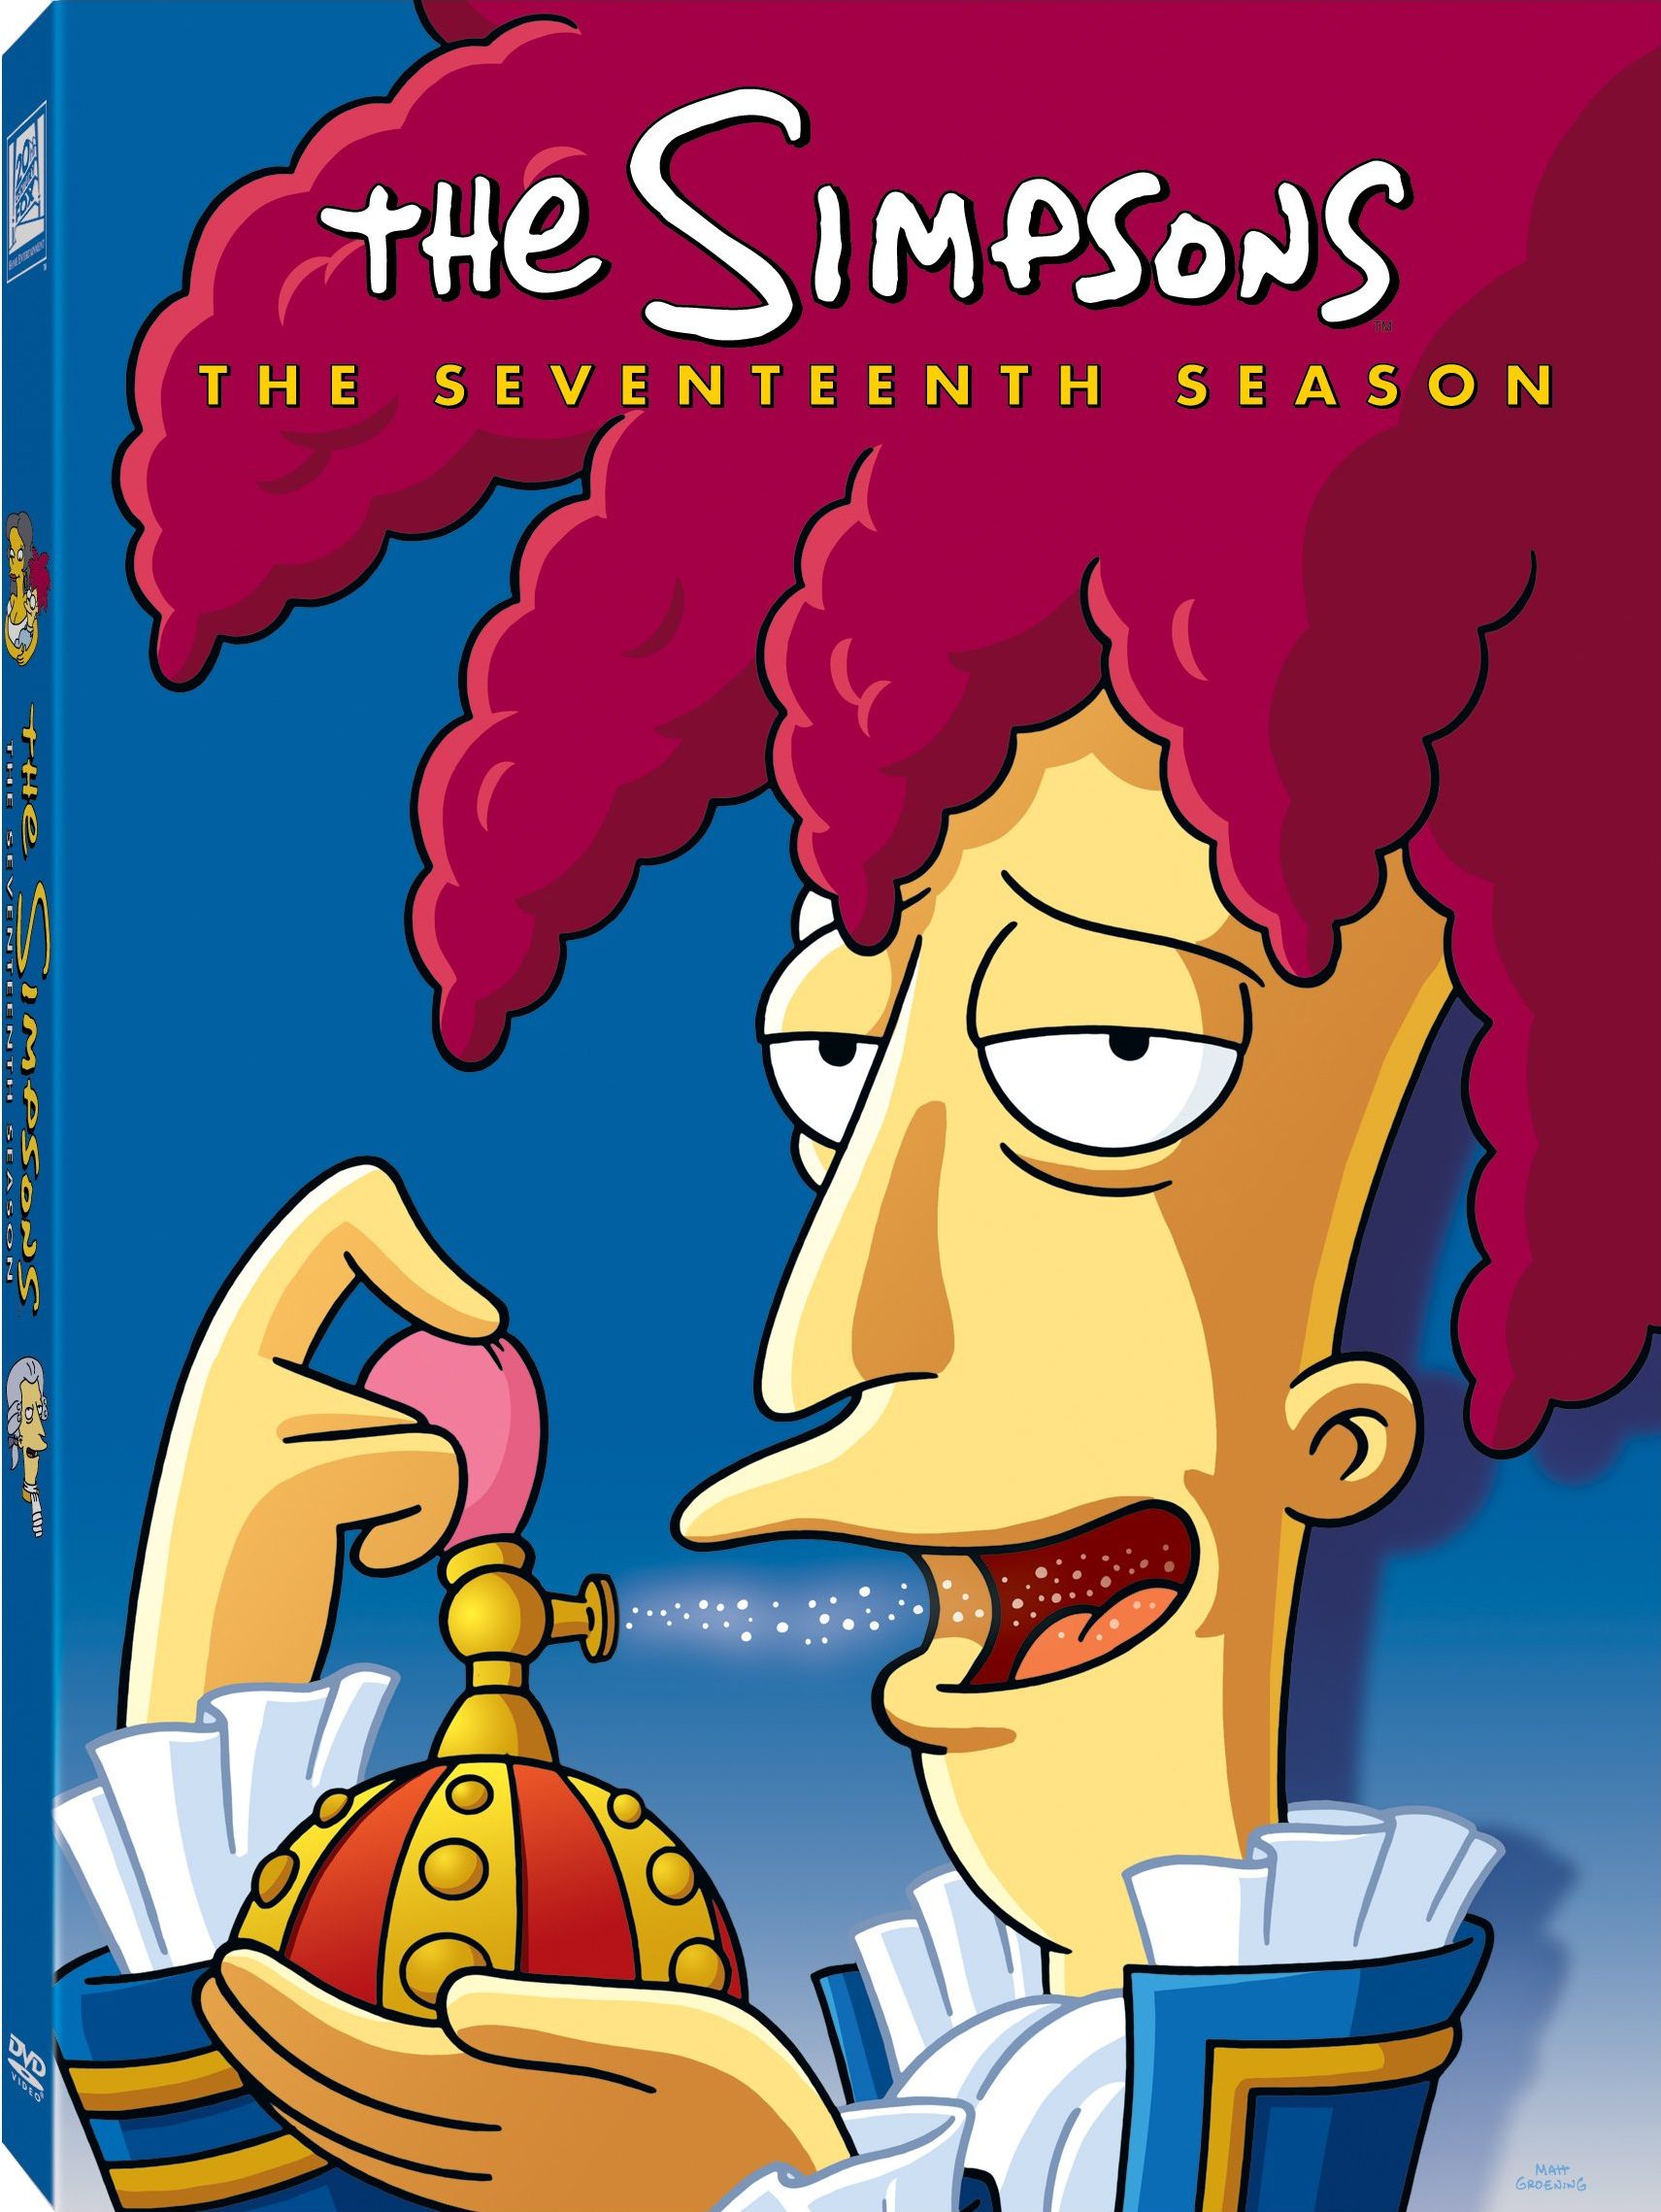 The Simpsons Dvd Release Date